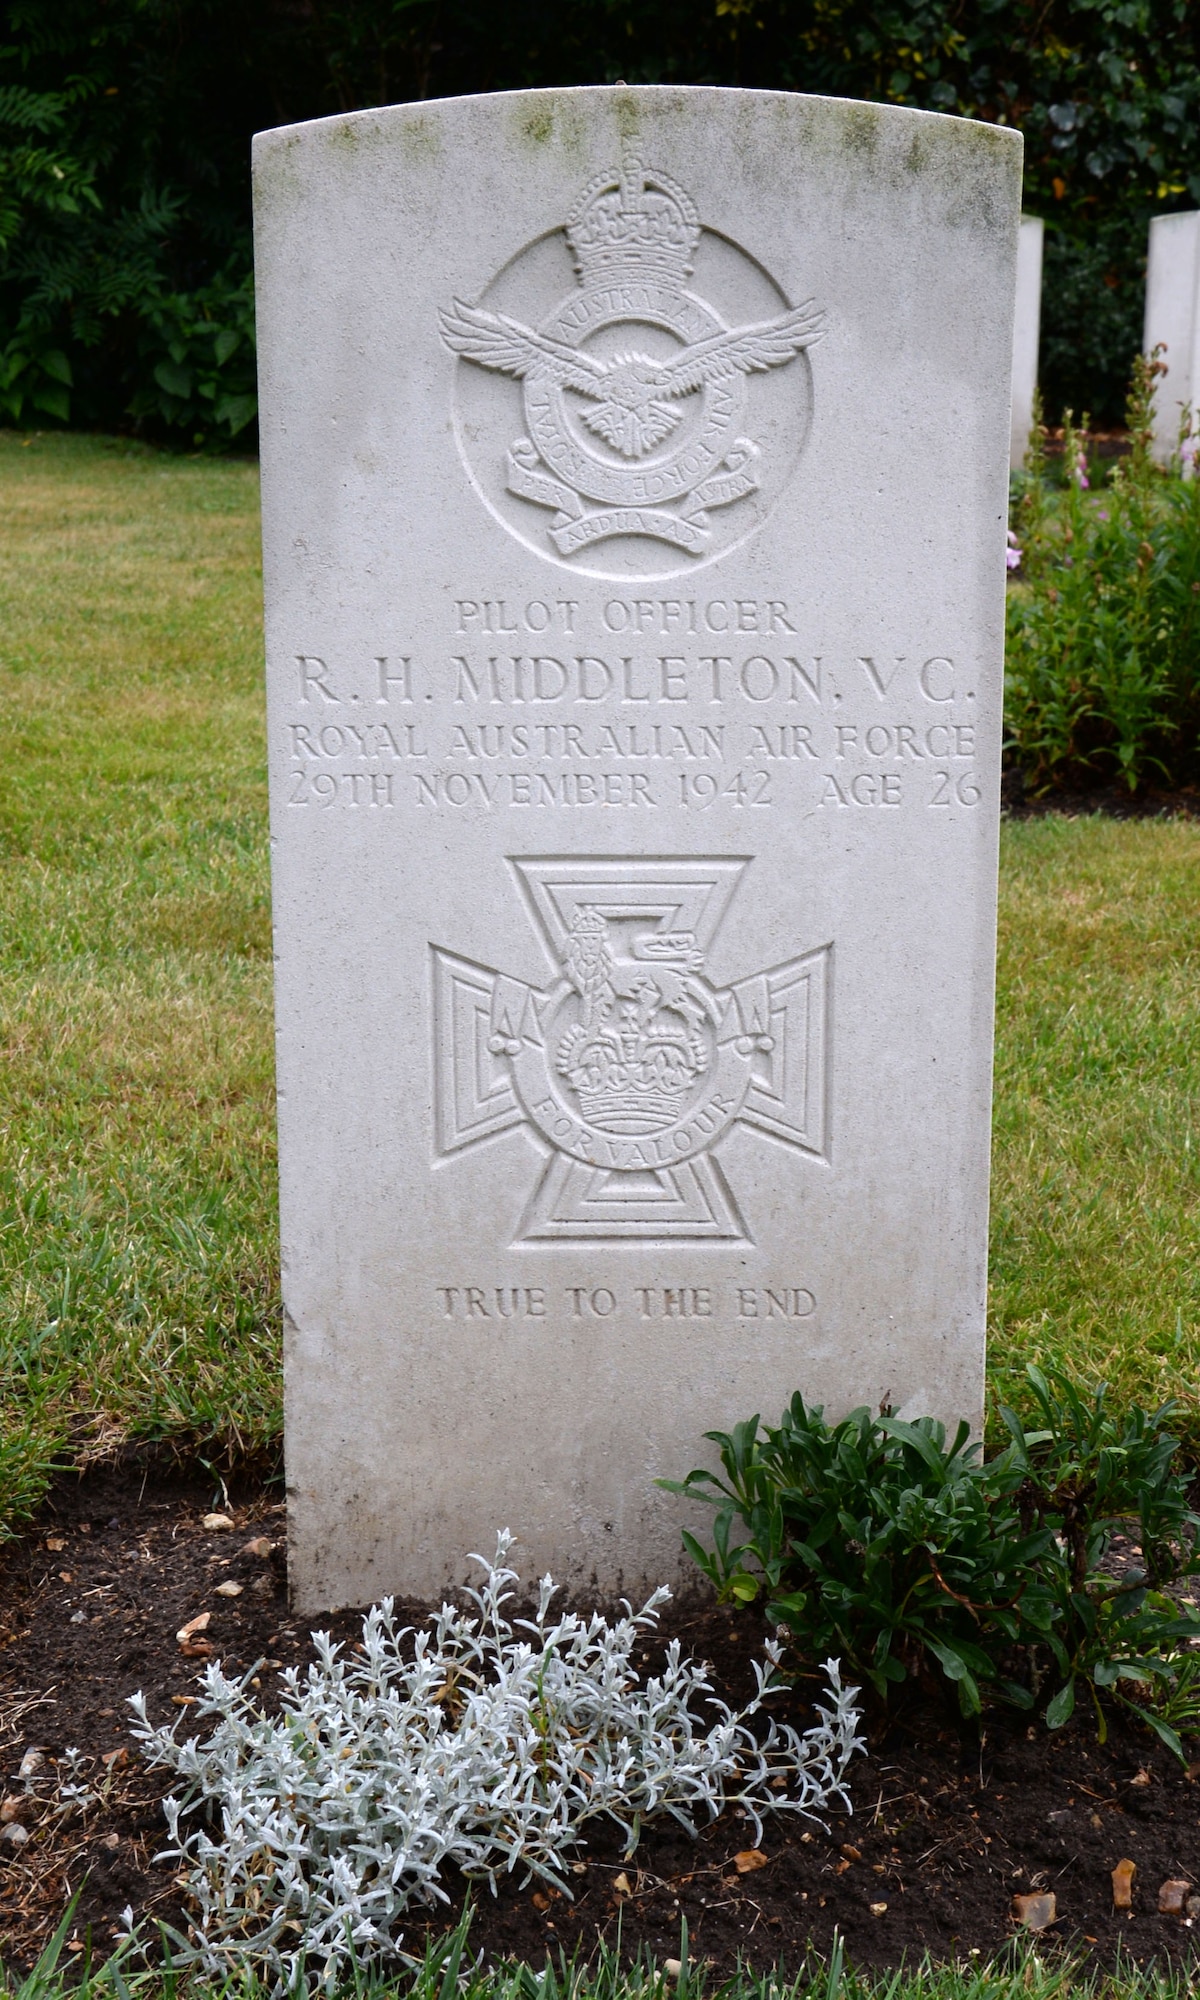 Pilot Officer Rawdon Hume Middleton’s grave rests in the churchyard of St. John's, Aug. 4, 2016, in Beck Row, England. Middleton died a war hero and was awarded a posthumous Victoria Cross. (U.S. Air Force photo by Gina Randall)